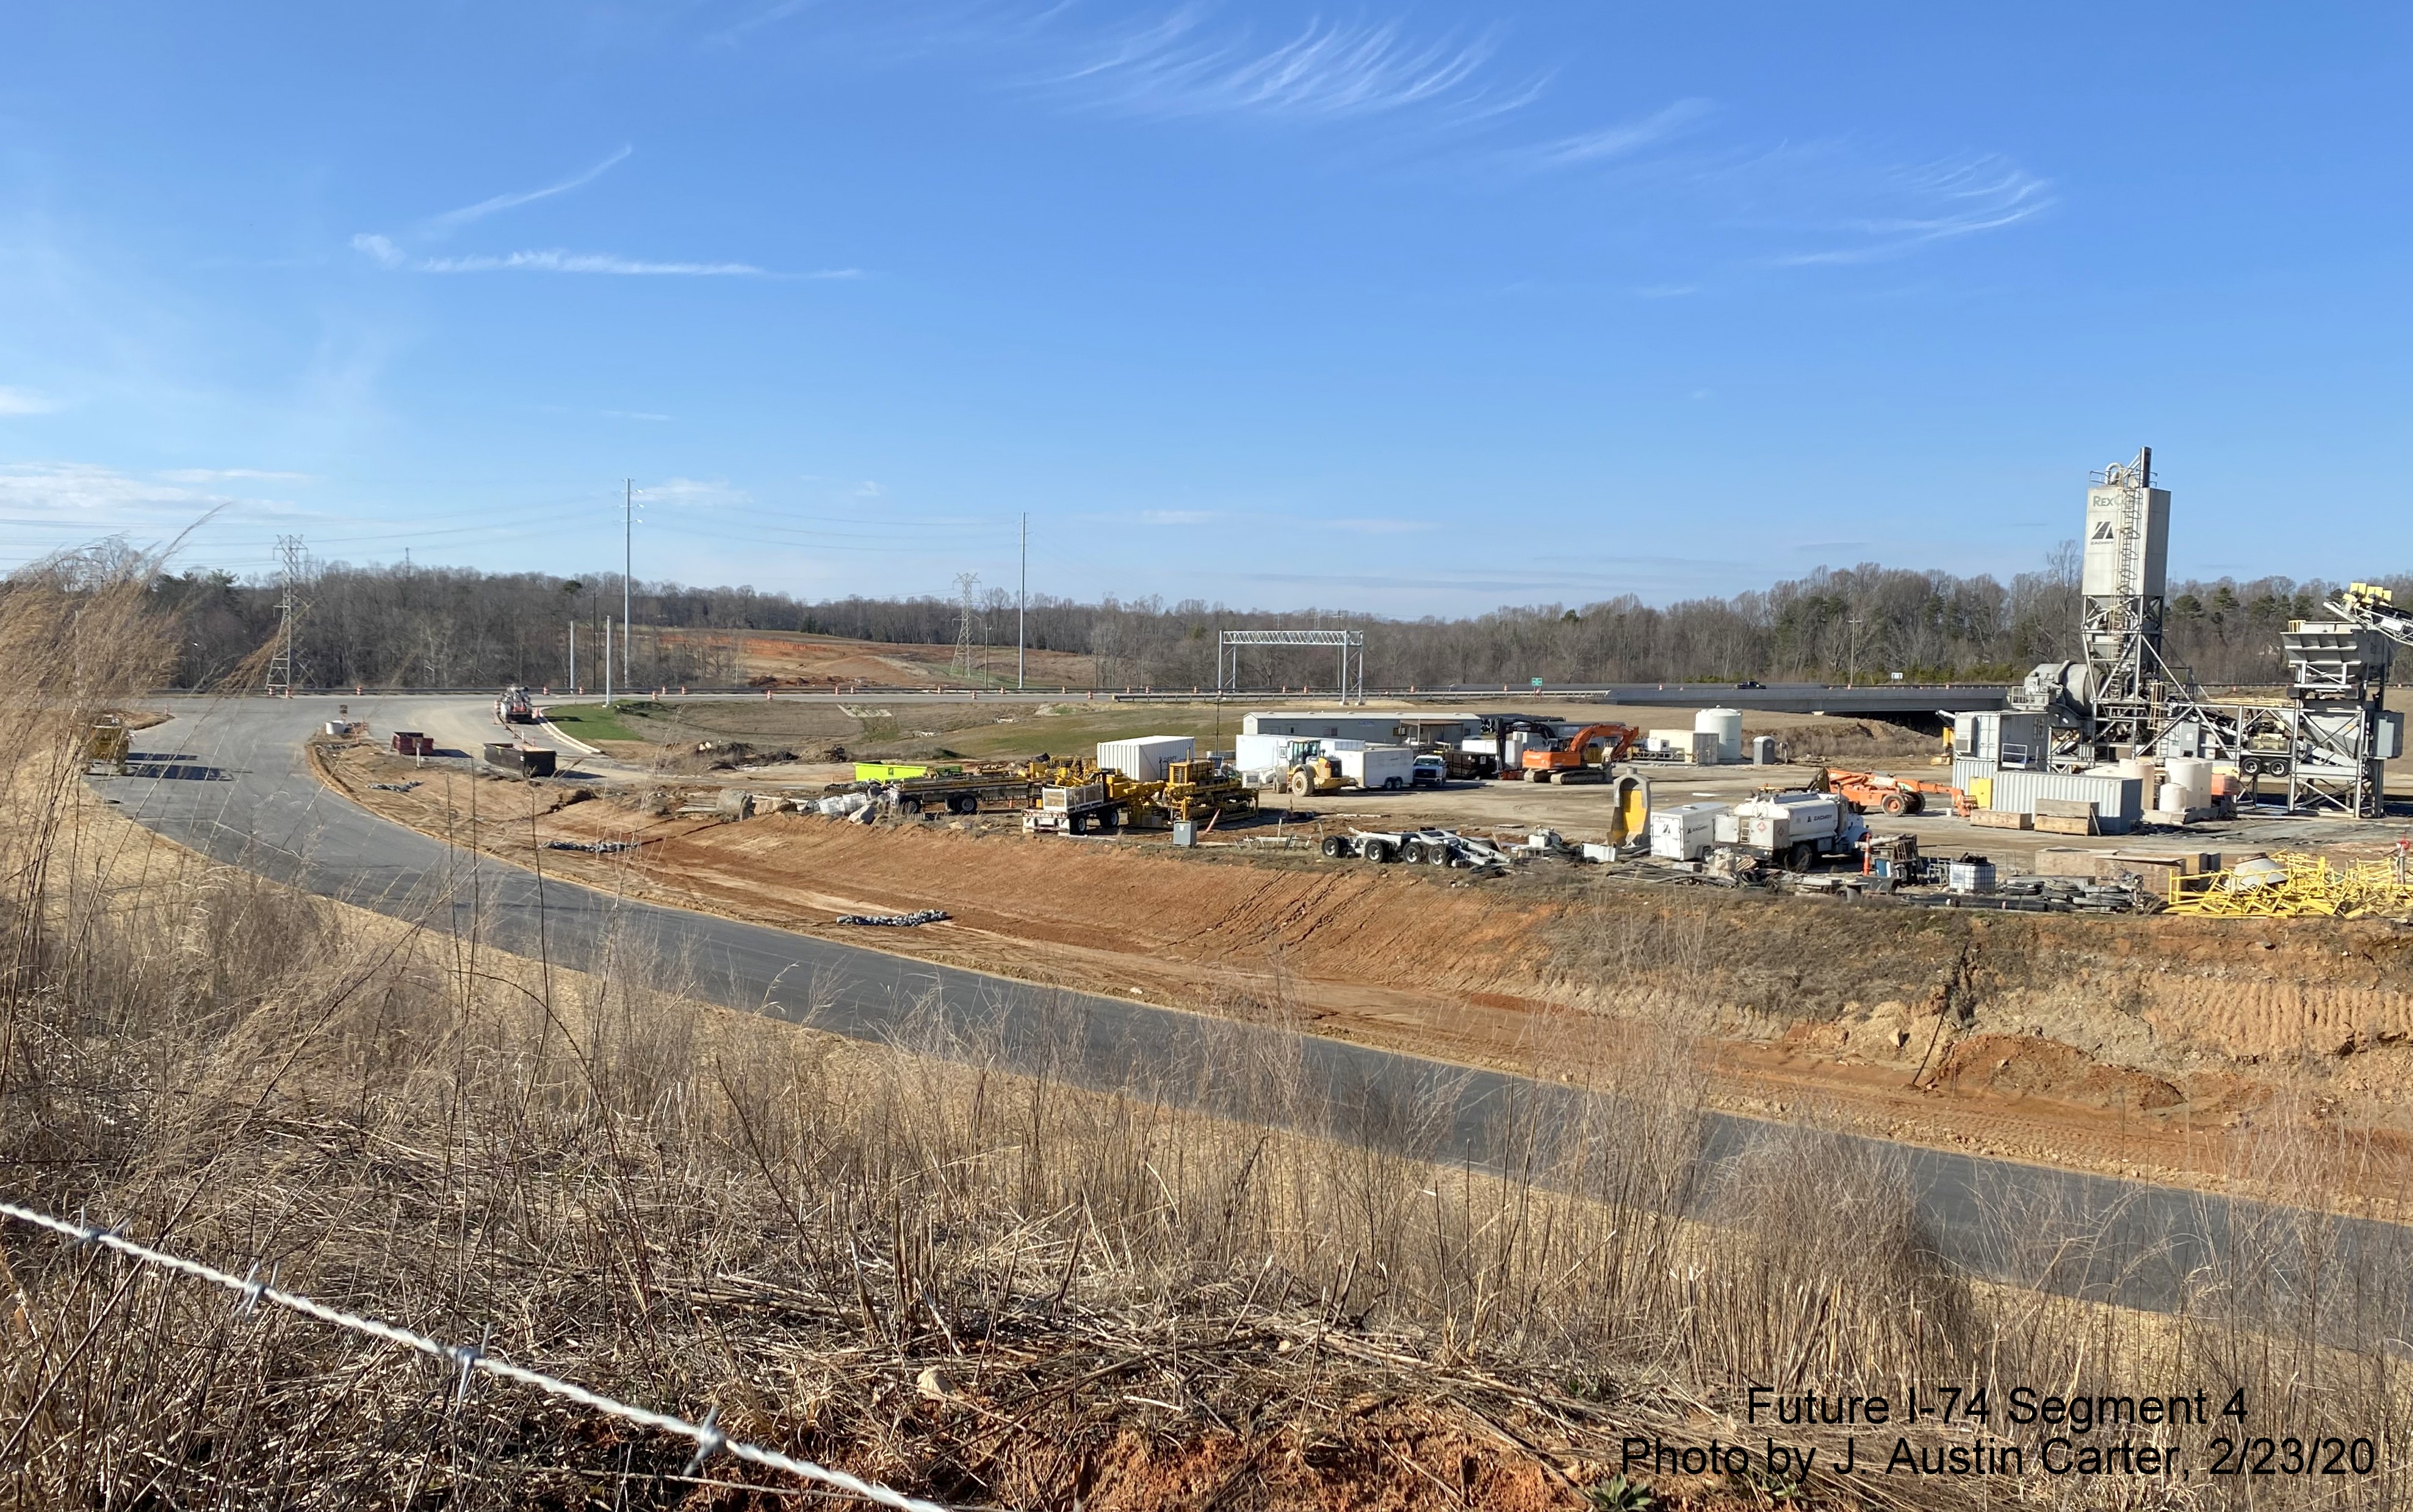 Image of on-ramp from US 158 to future I-74 East/Winston-Salem Beltway with temporary
        concrete plant in middle of interchange, by J. Austin Carter in Feb. 2020